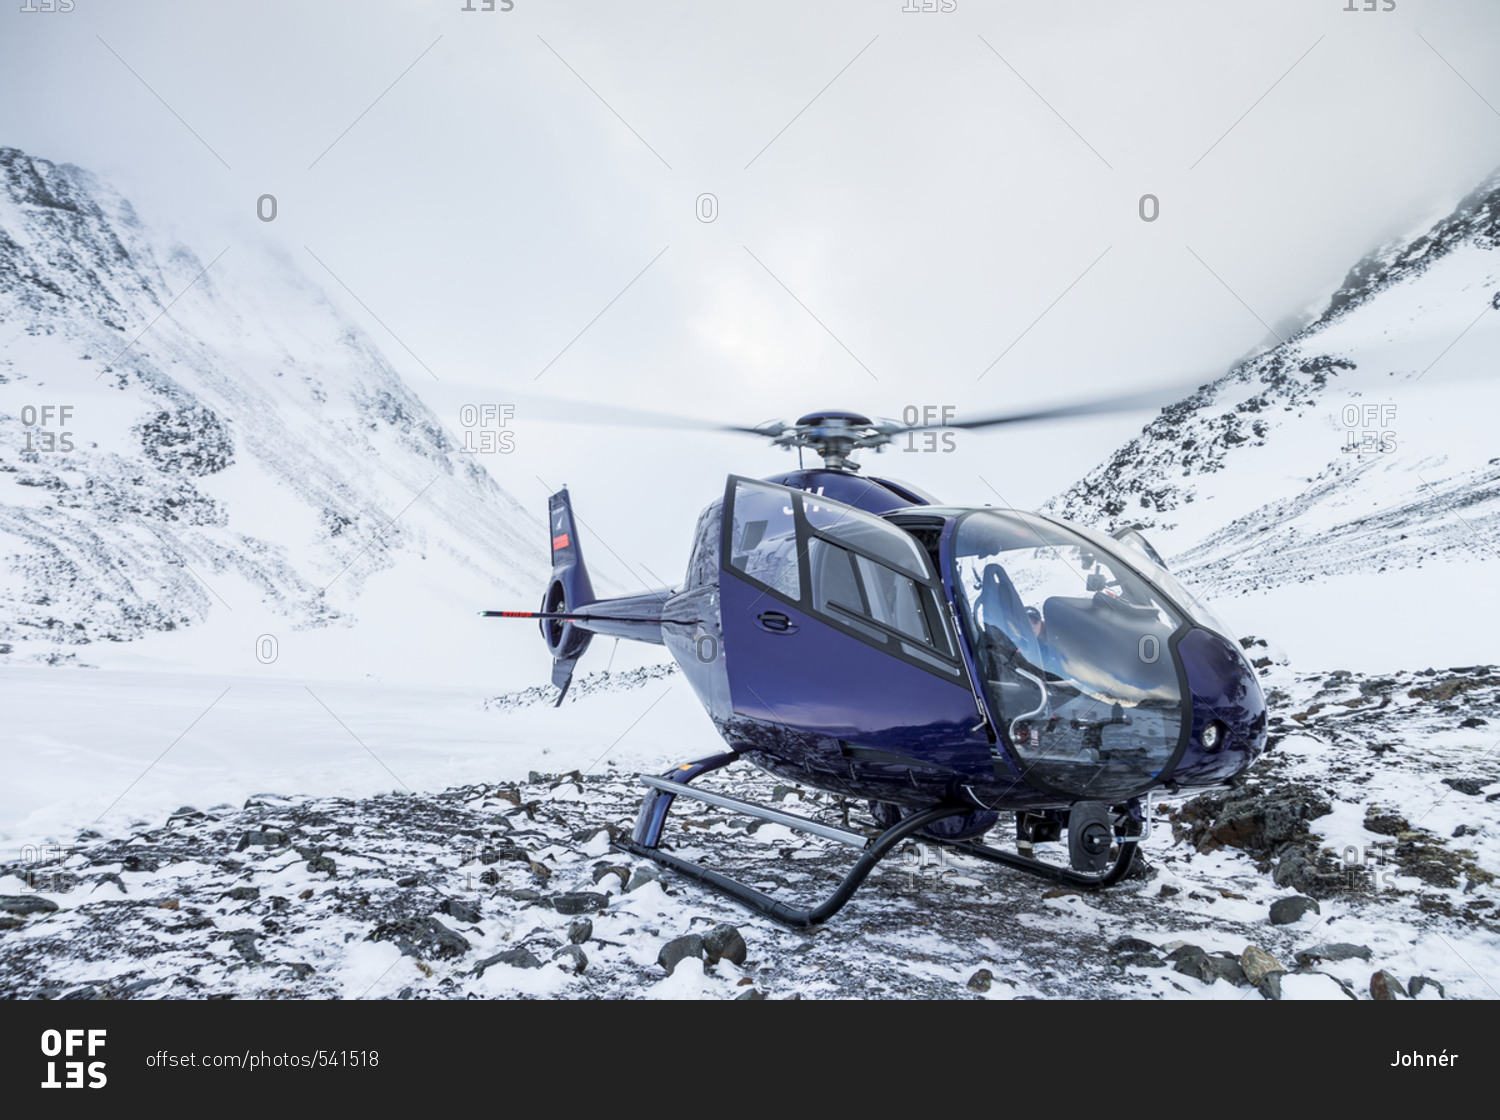 Helicopter in snowy landscape